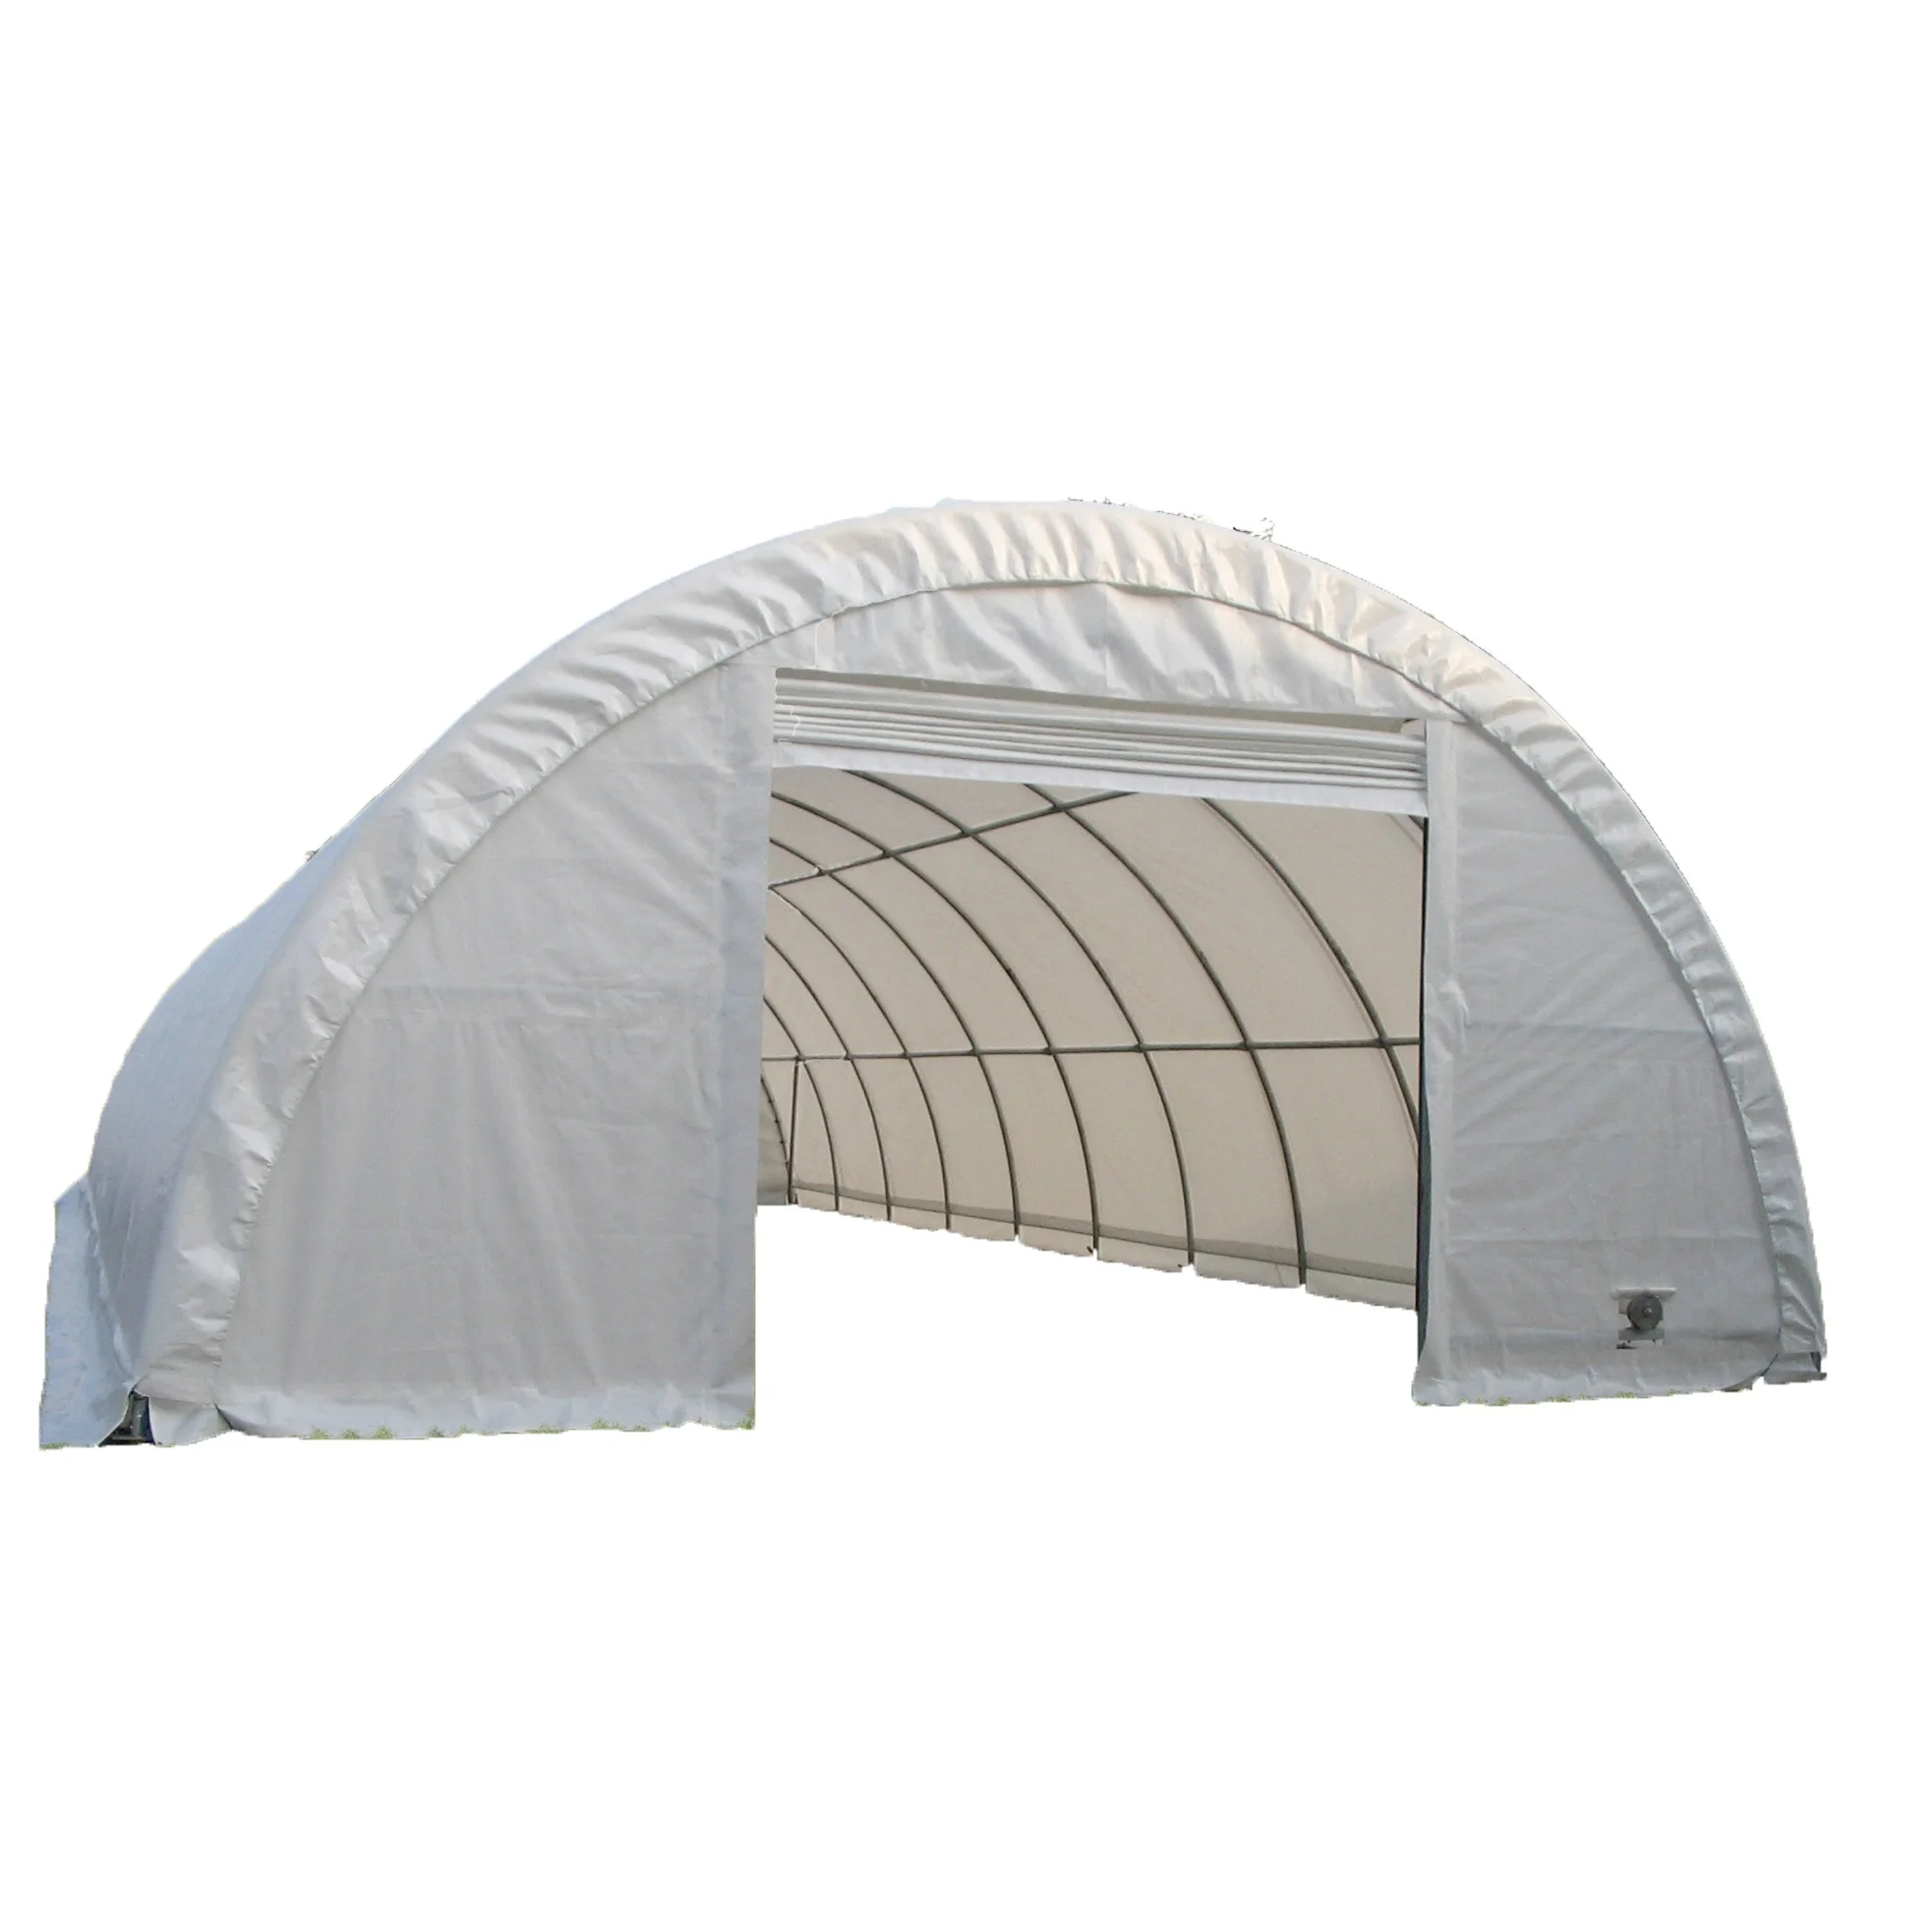 High Quality Big Outdoor Industrial Warehouse Dome Tent